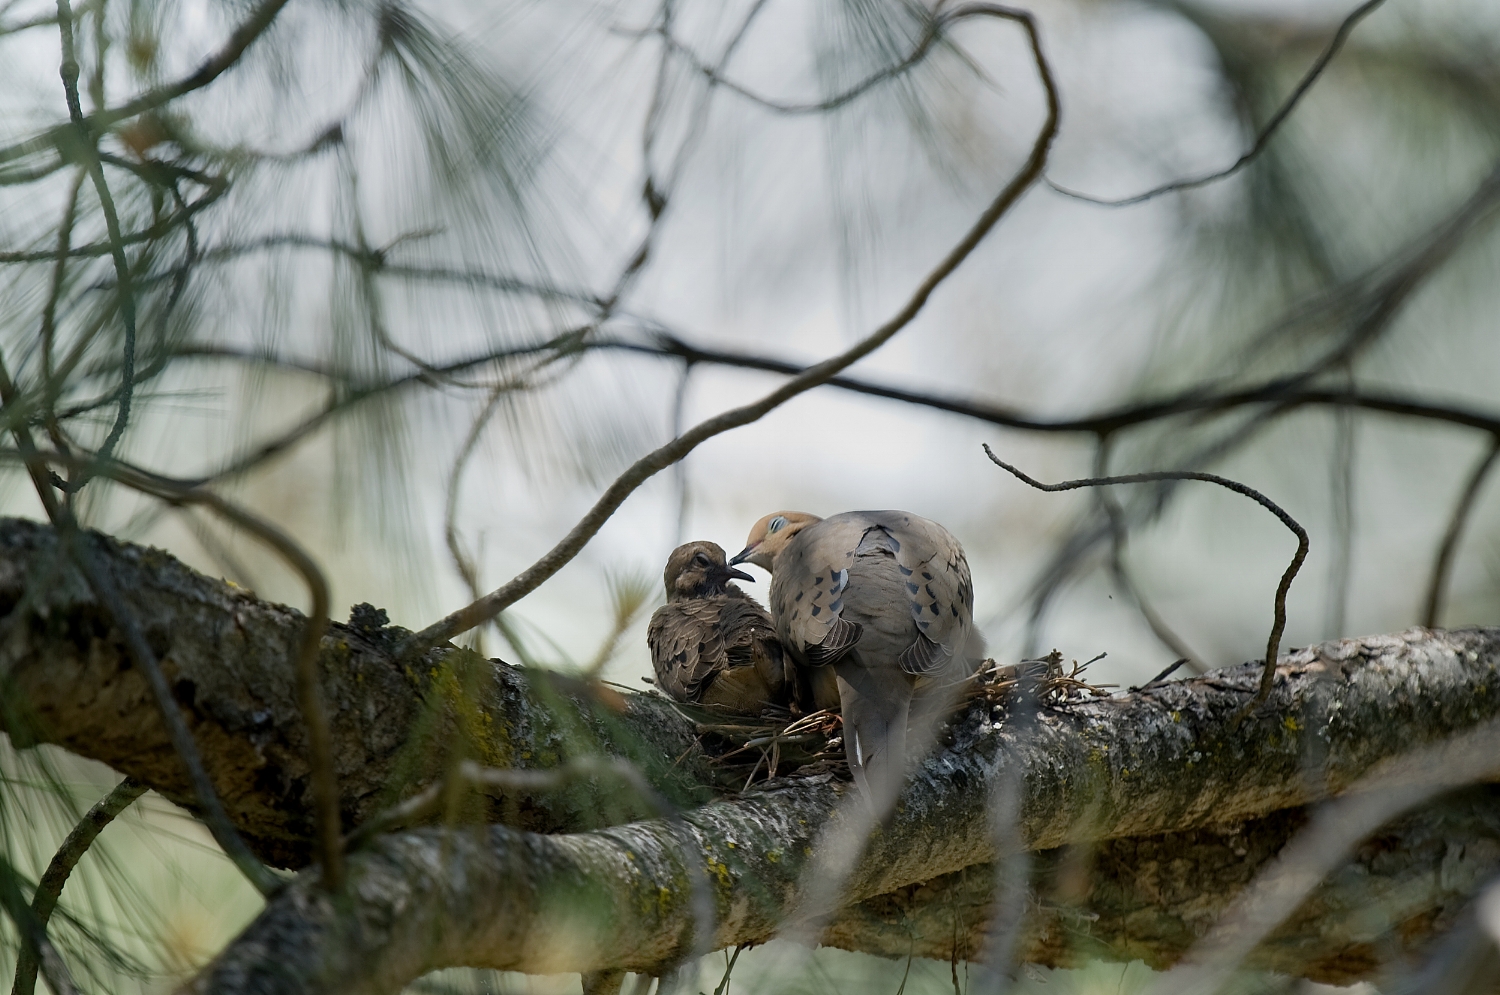  A mourning dove (Zenaida macroura) tends to its young in a nest in El Dorado on Monday, May 18, 2009. 